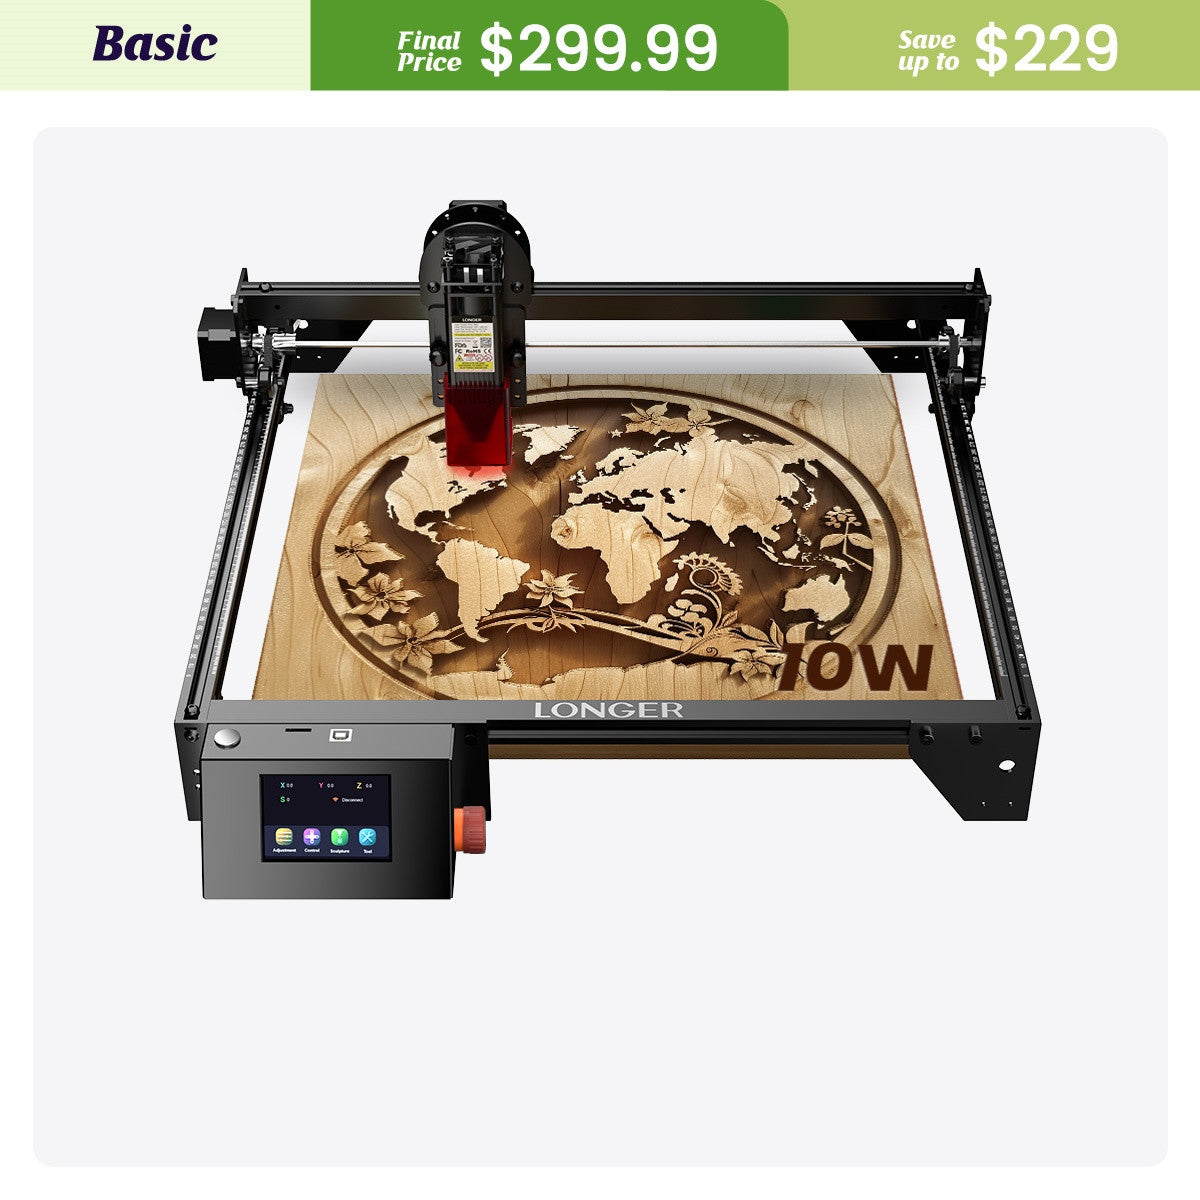 RAY5 10W Laser Engraver